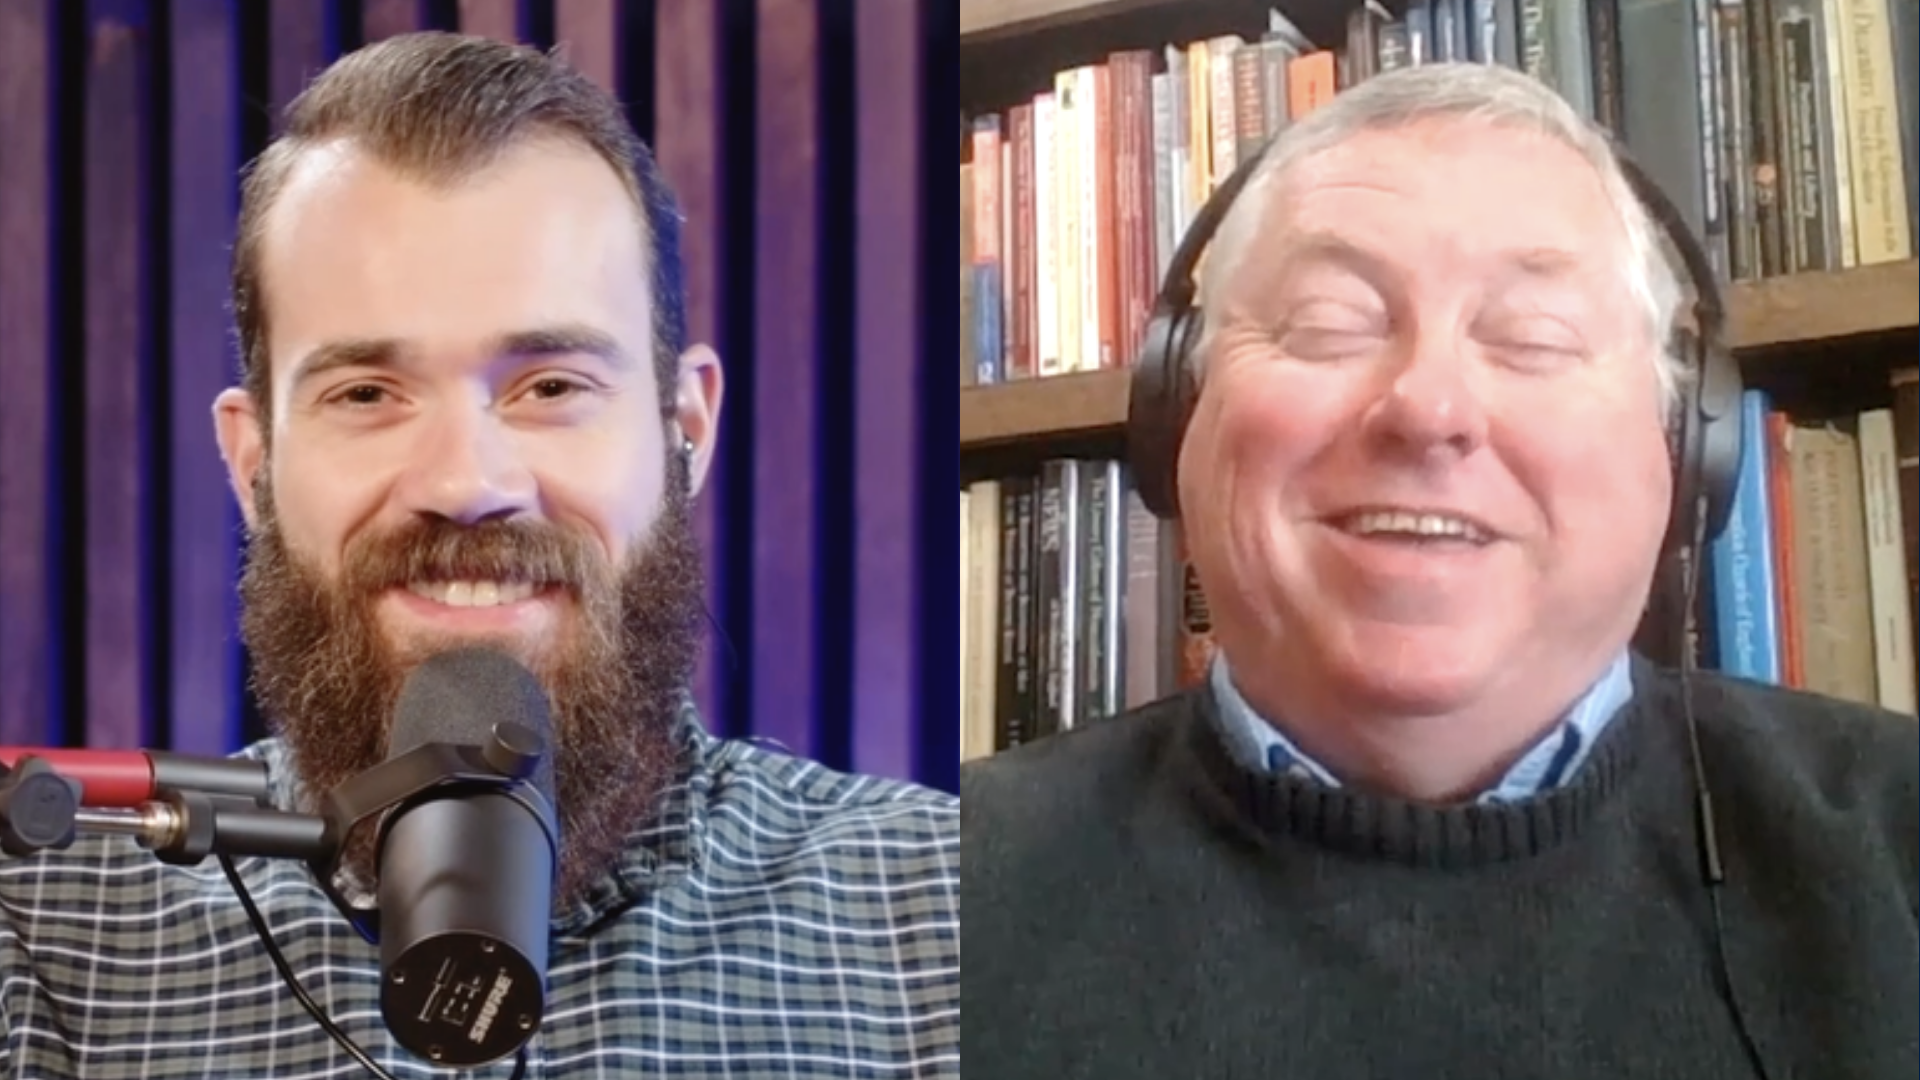 Partnering on Mission: Why Church Associationalism Matters With Dr. James Renihan